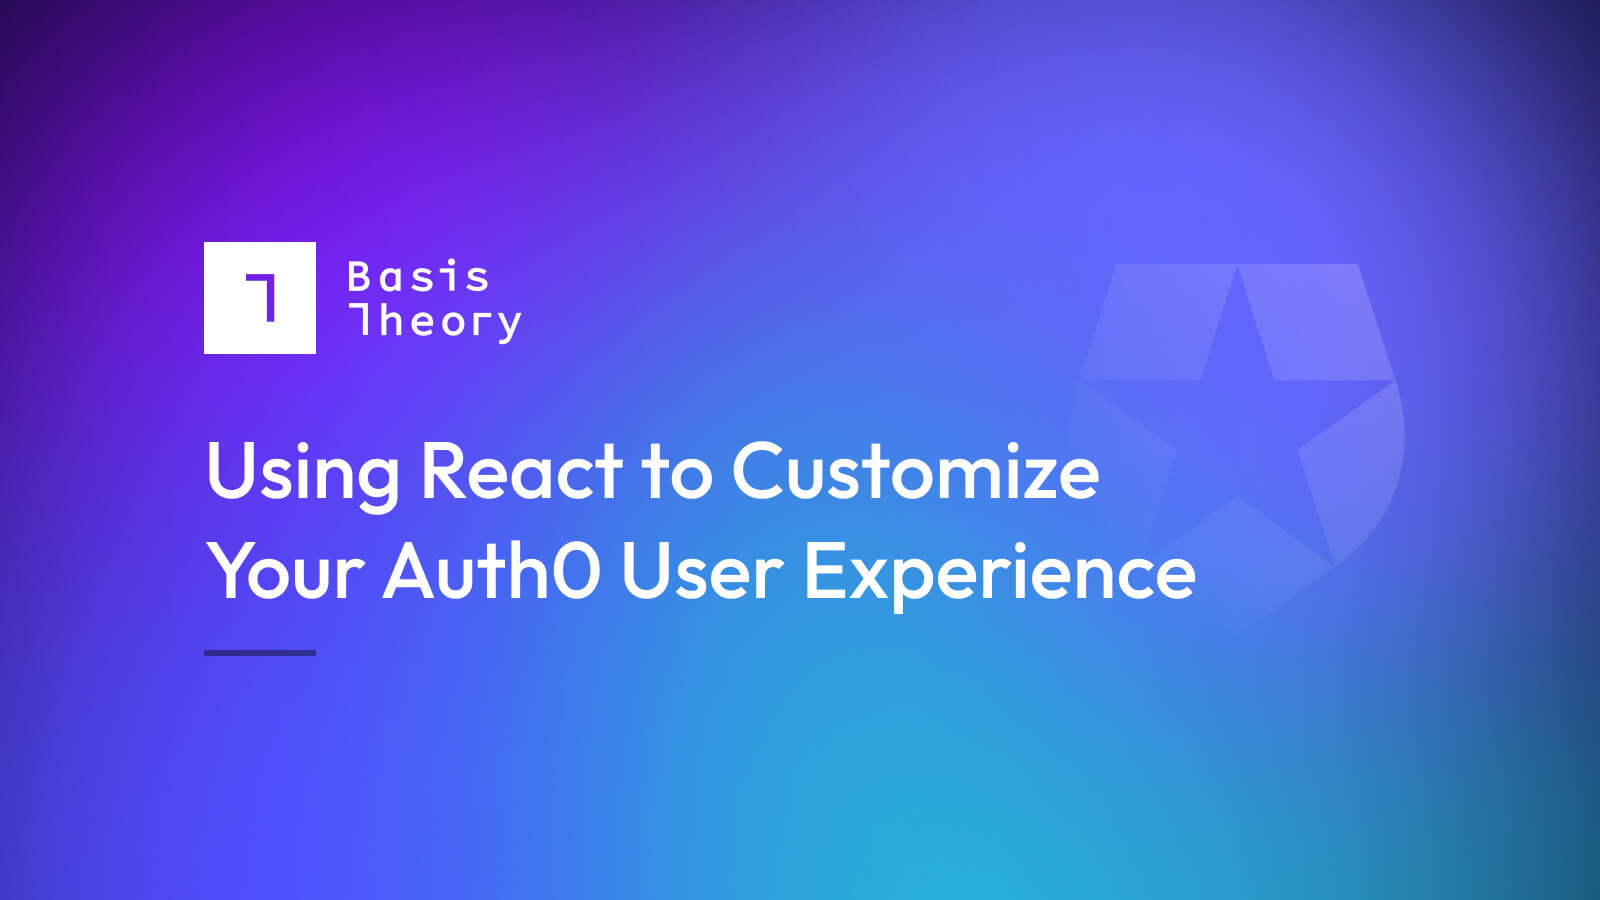 Using React to customize your Auth0 User Experience